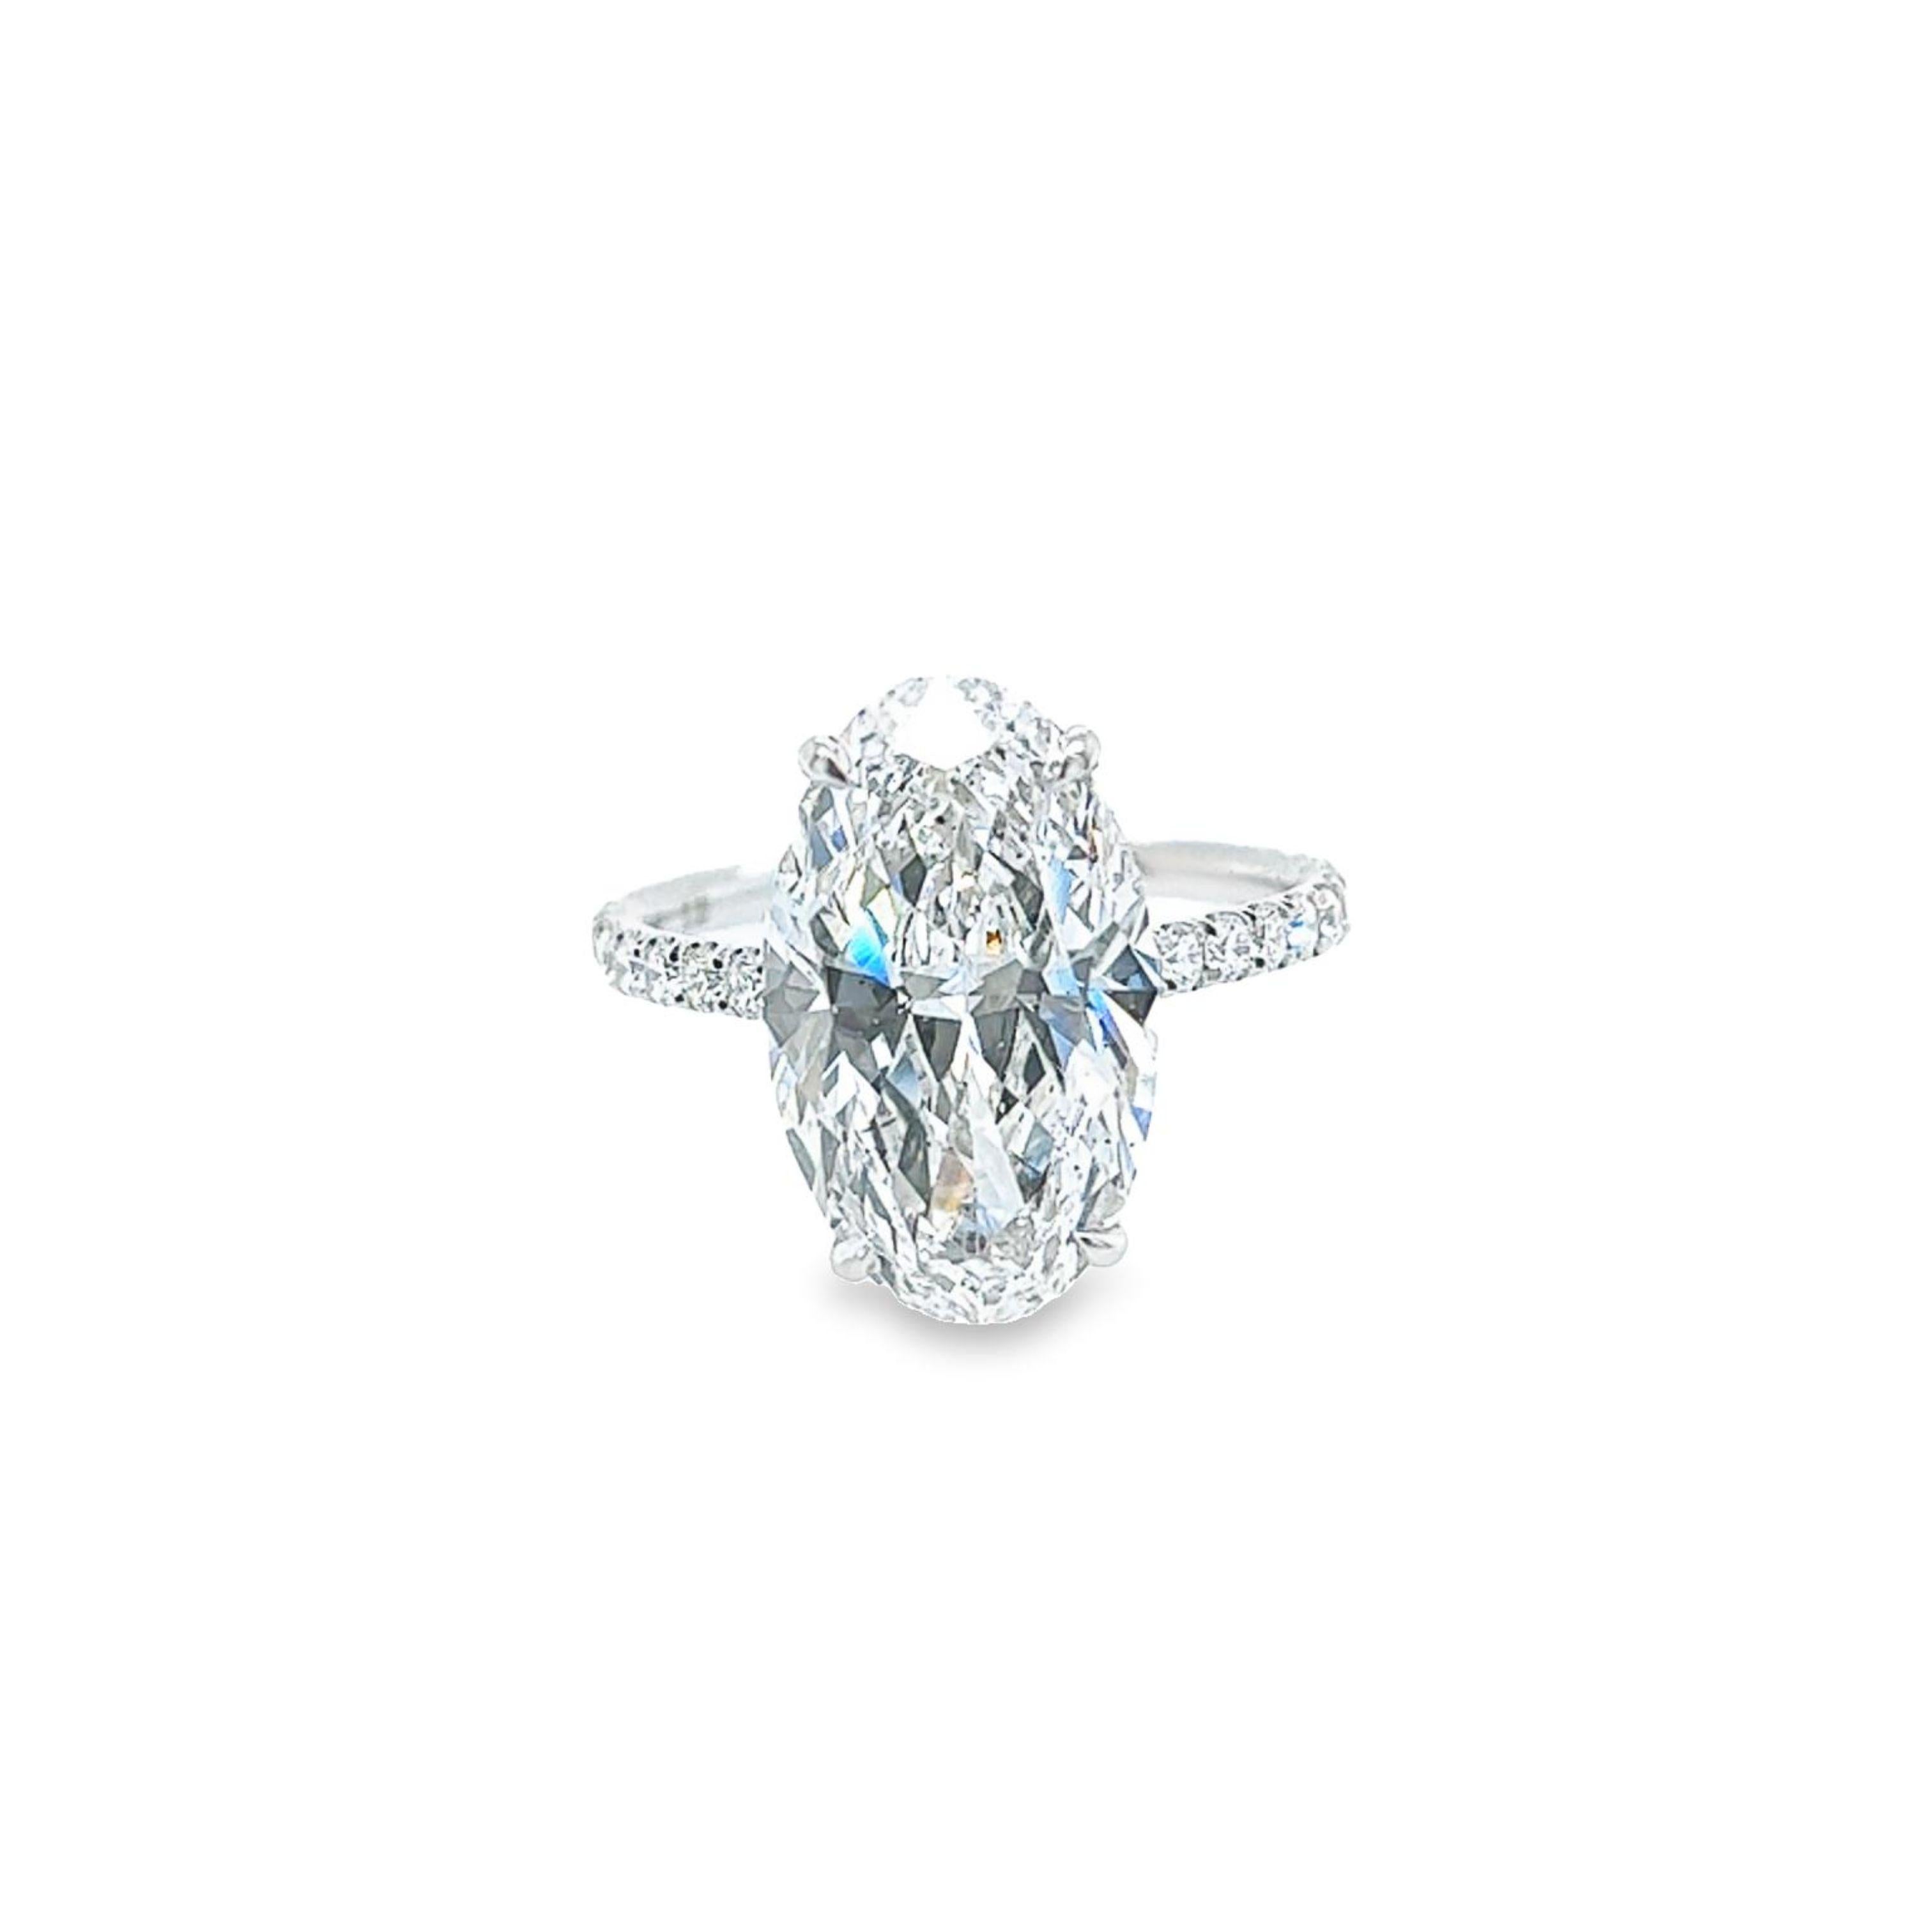 Rosenberg Diamonds & Co. 5.18 carat Oval cut D color SI2 clarity is accompanied by a GIA certificate. This beautiful Oval is full of brilliance and an exceptional SI2 that is set in a handmade platinum setting. This ring continues its elegance with